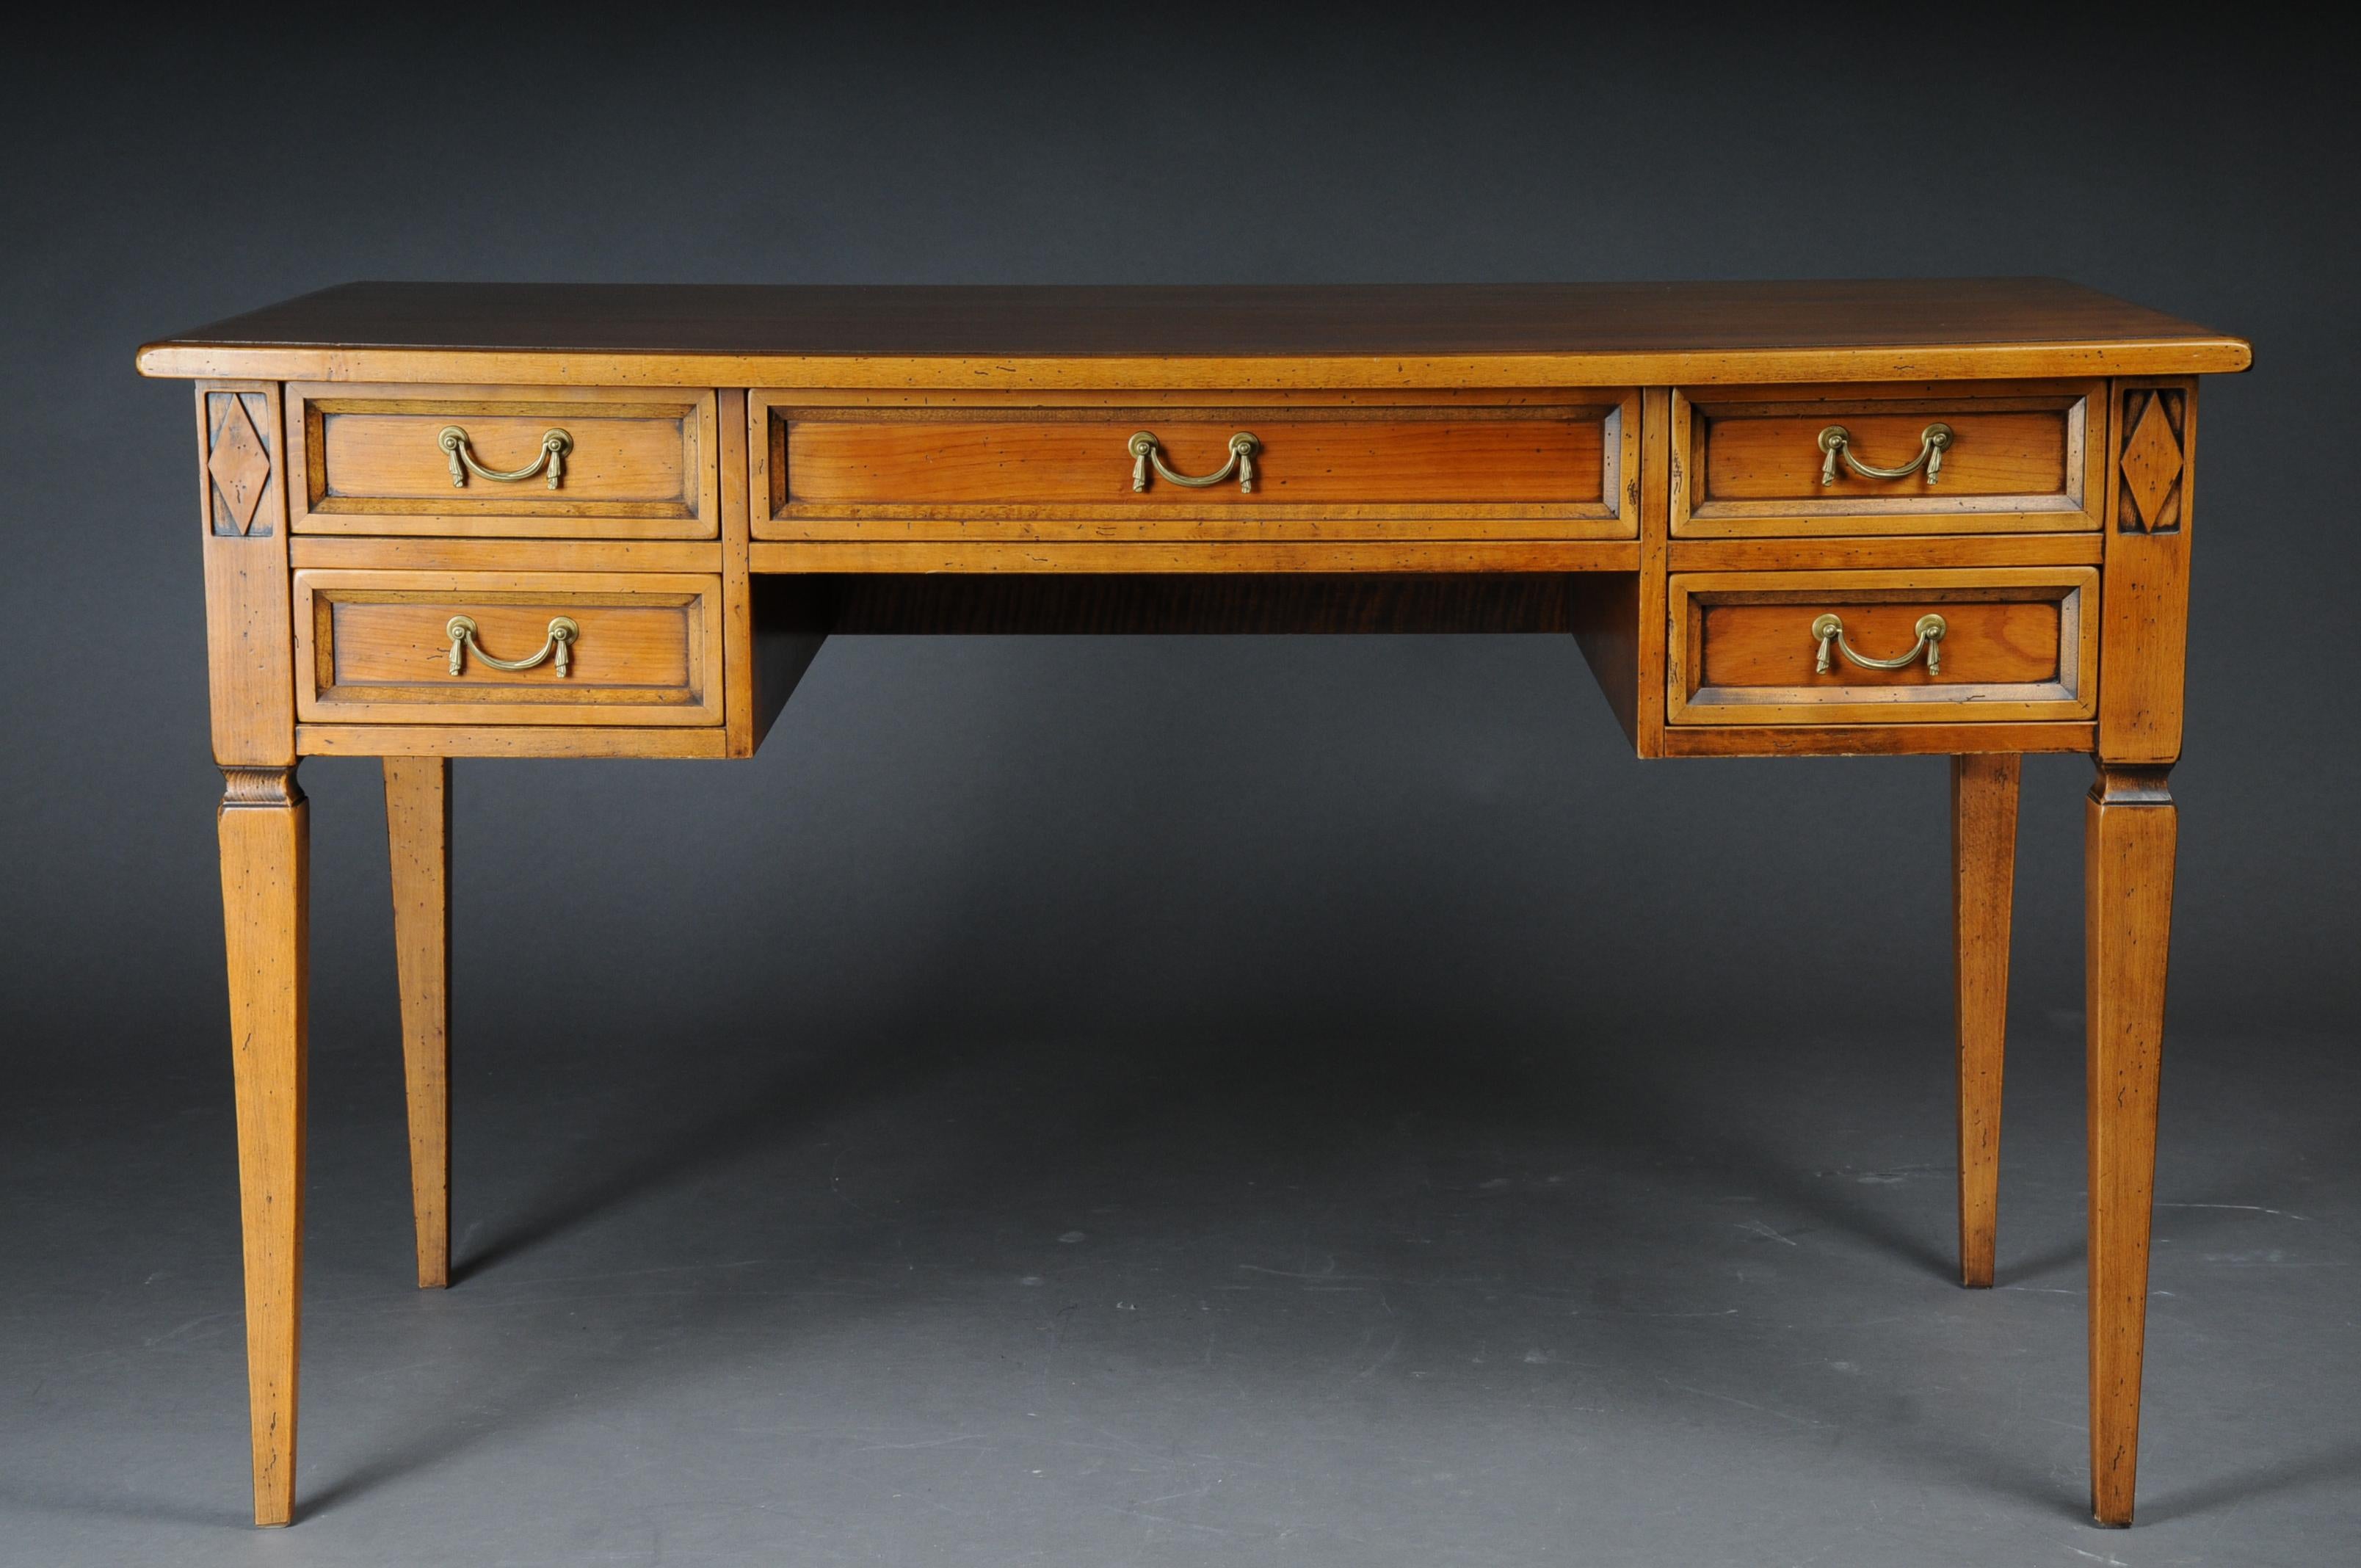 20th century Classic desk in the style of classicism.
Solid wood and cherry veneer. Longitudinal rectangular table top with five drawers, cut-out frame for legroom and square legs tapering downwards. Nice patina, hand polish with